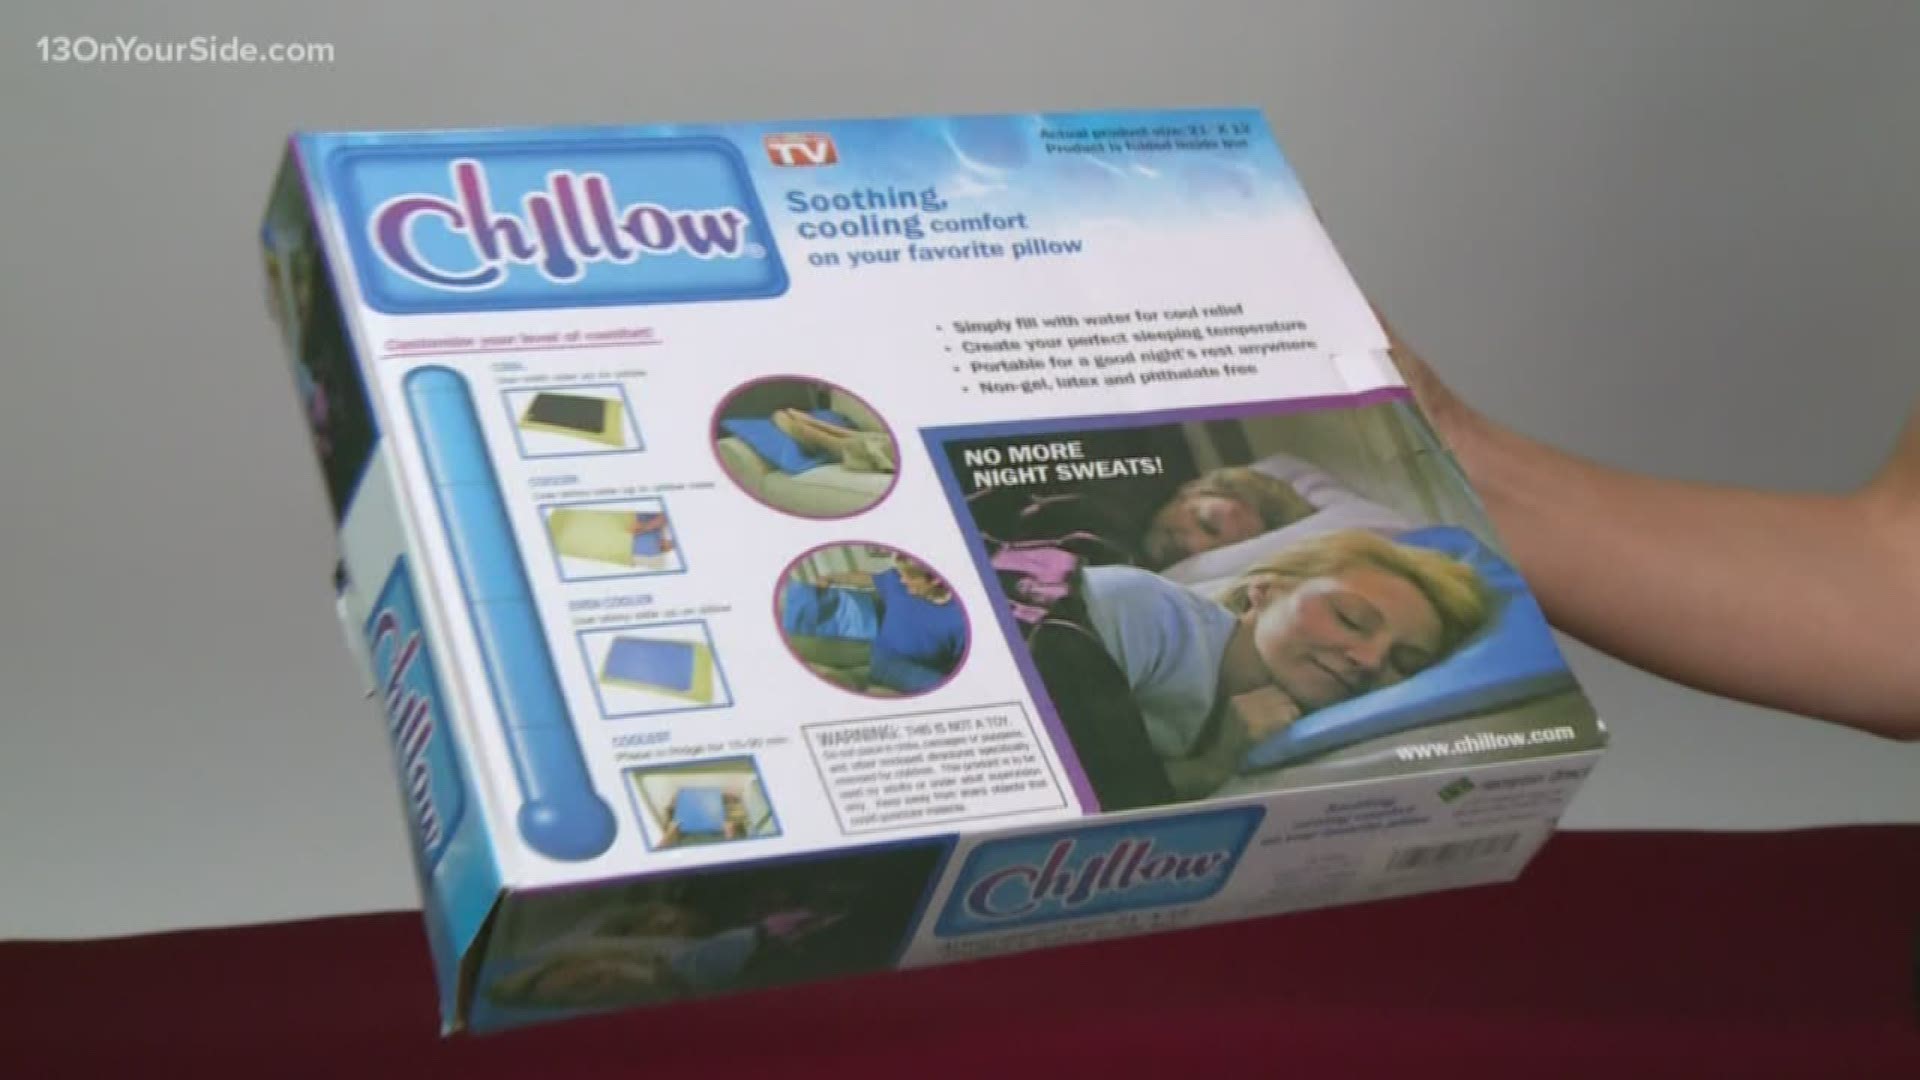 In the latest edition of "Try It Before You Buy It" 13 On Your Side's Kristin Mazur puts the "Chillow" to the test to see if it can help battle night sweats and provide a better night's rest.